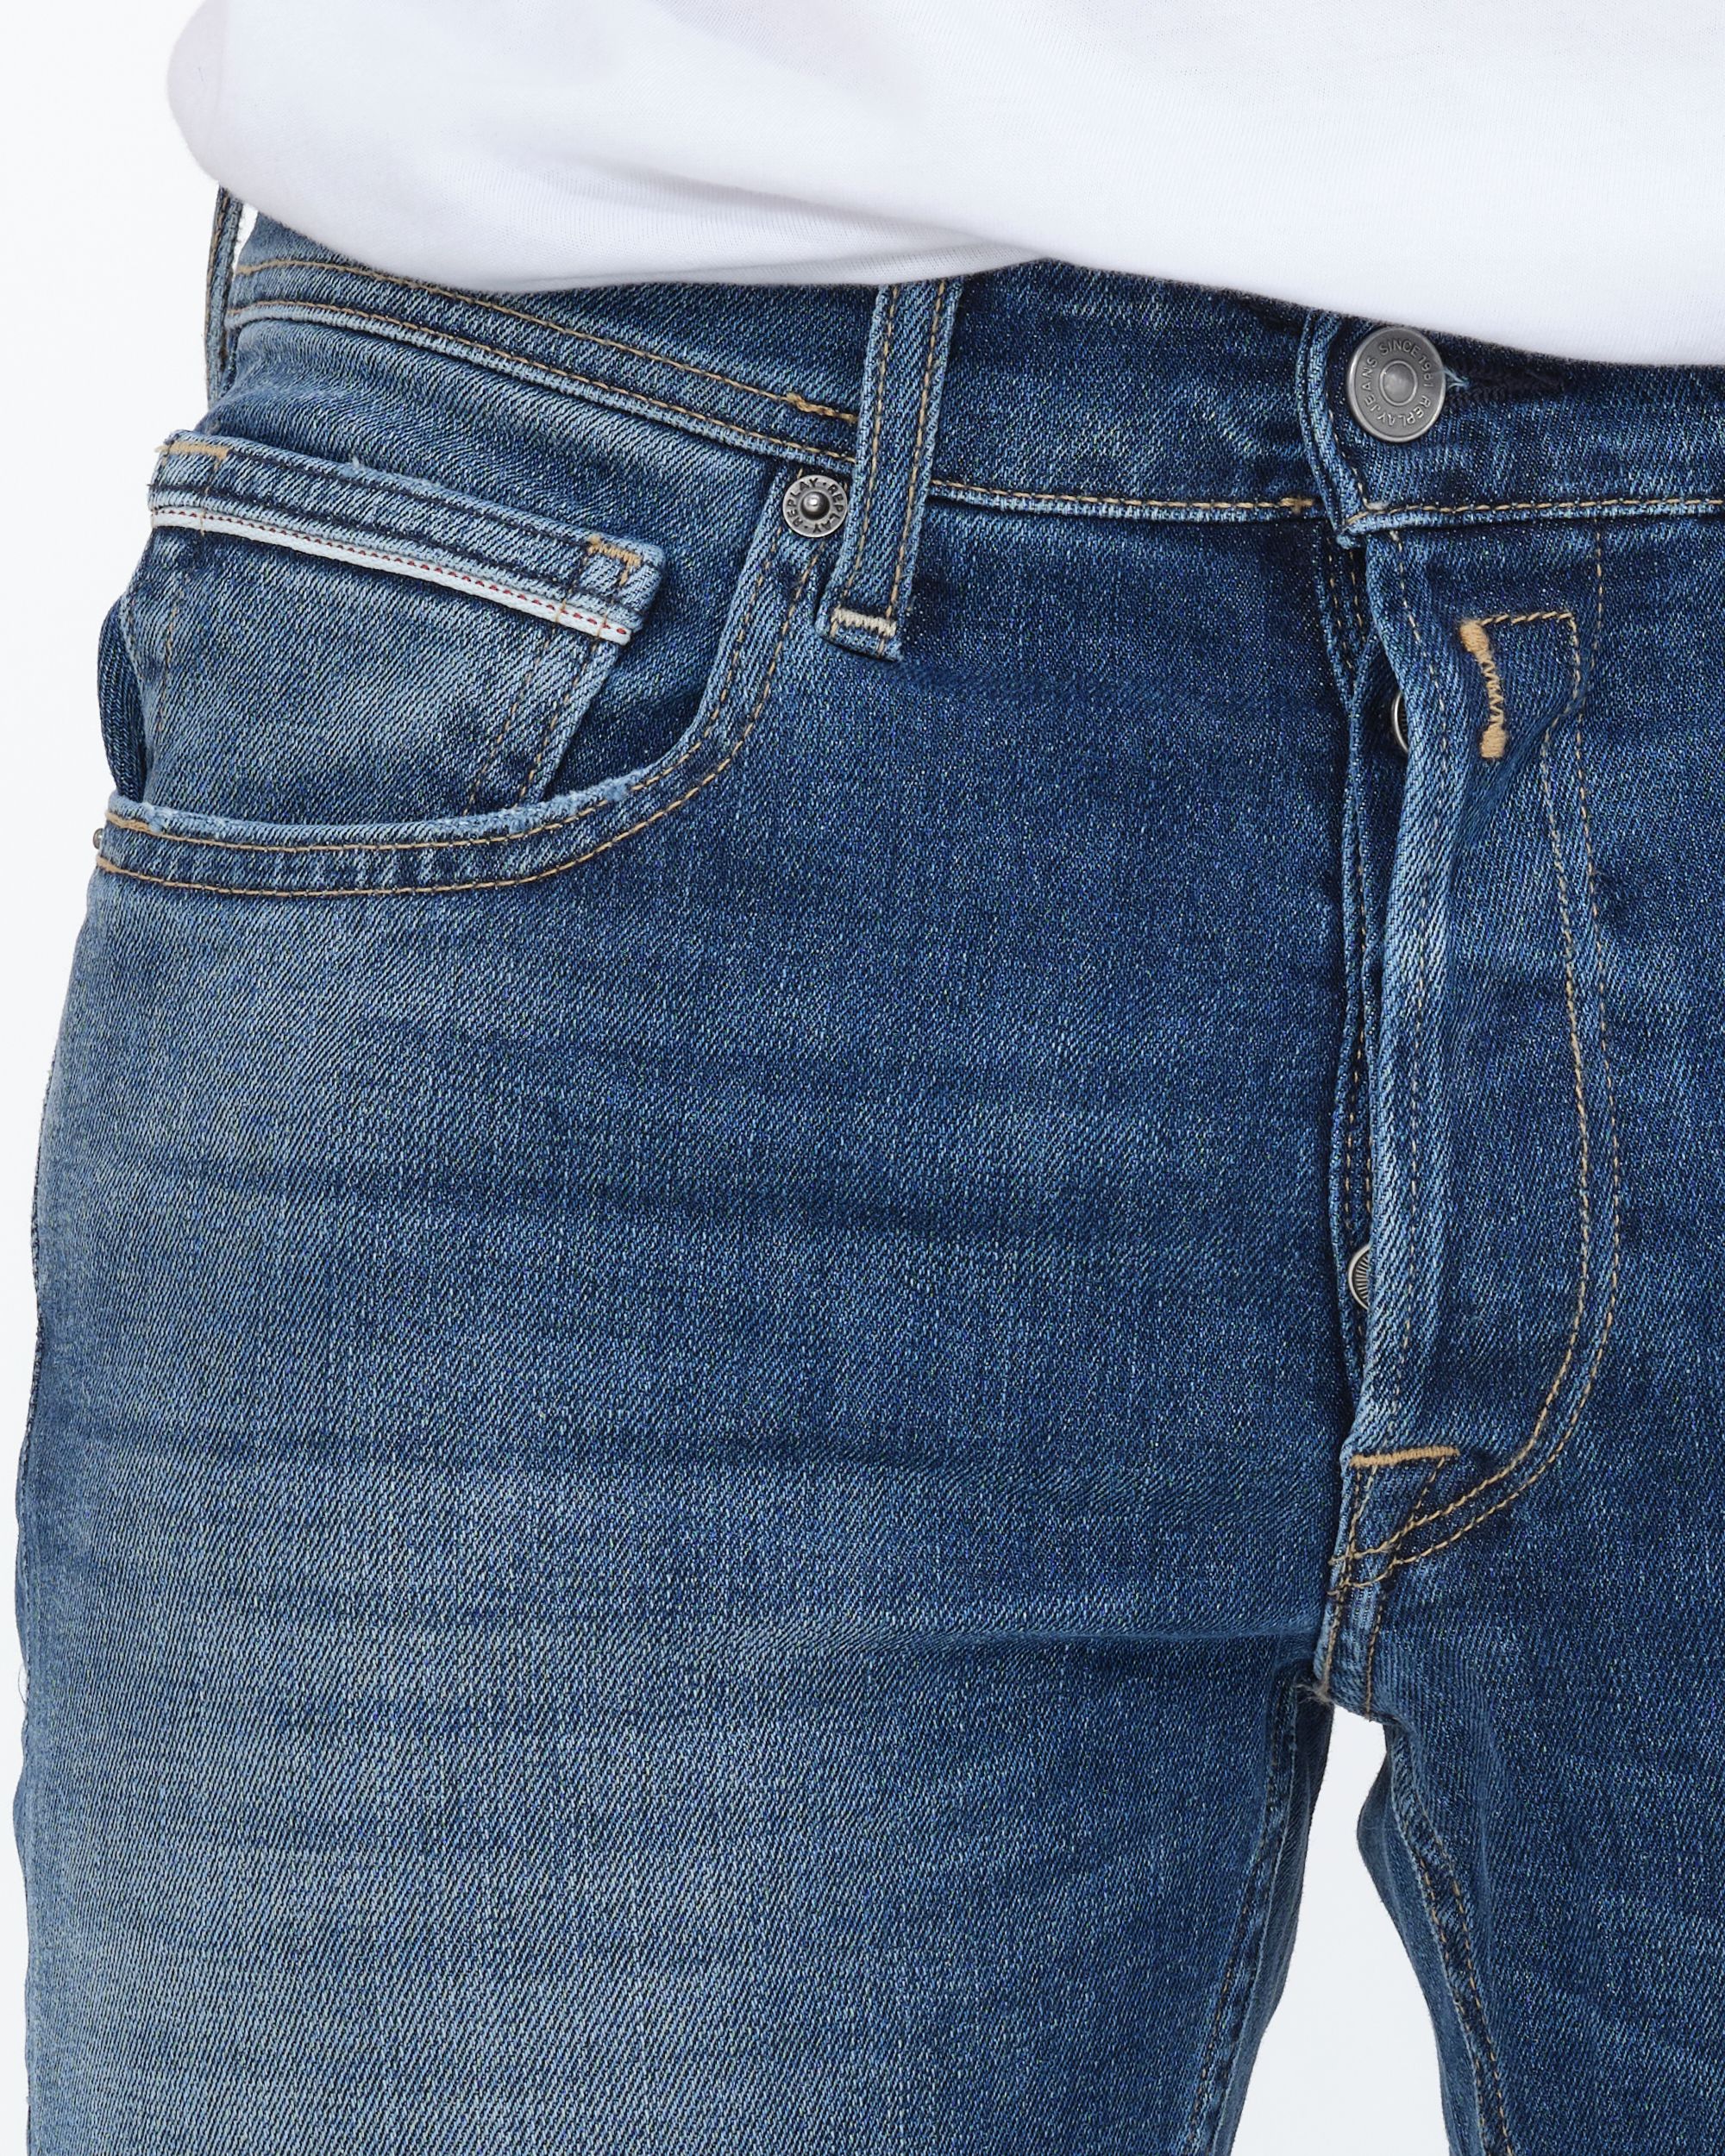 Replay Grover Jeans Blauw 081755-001-34/34